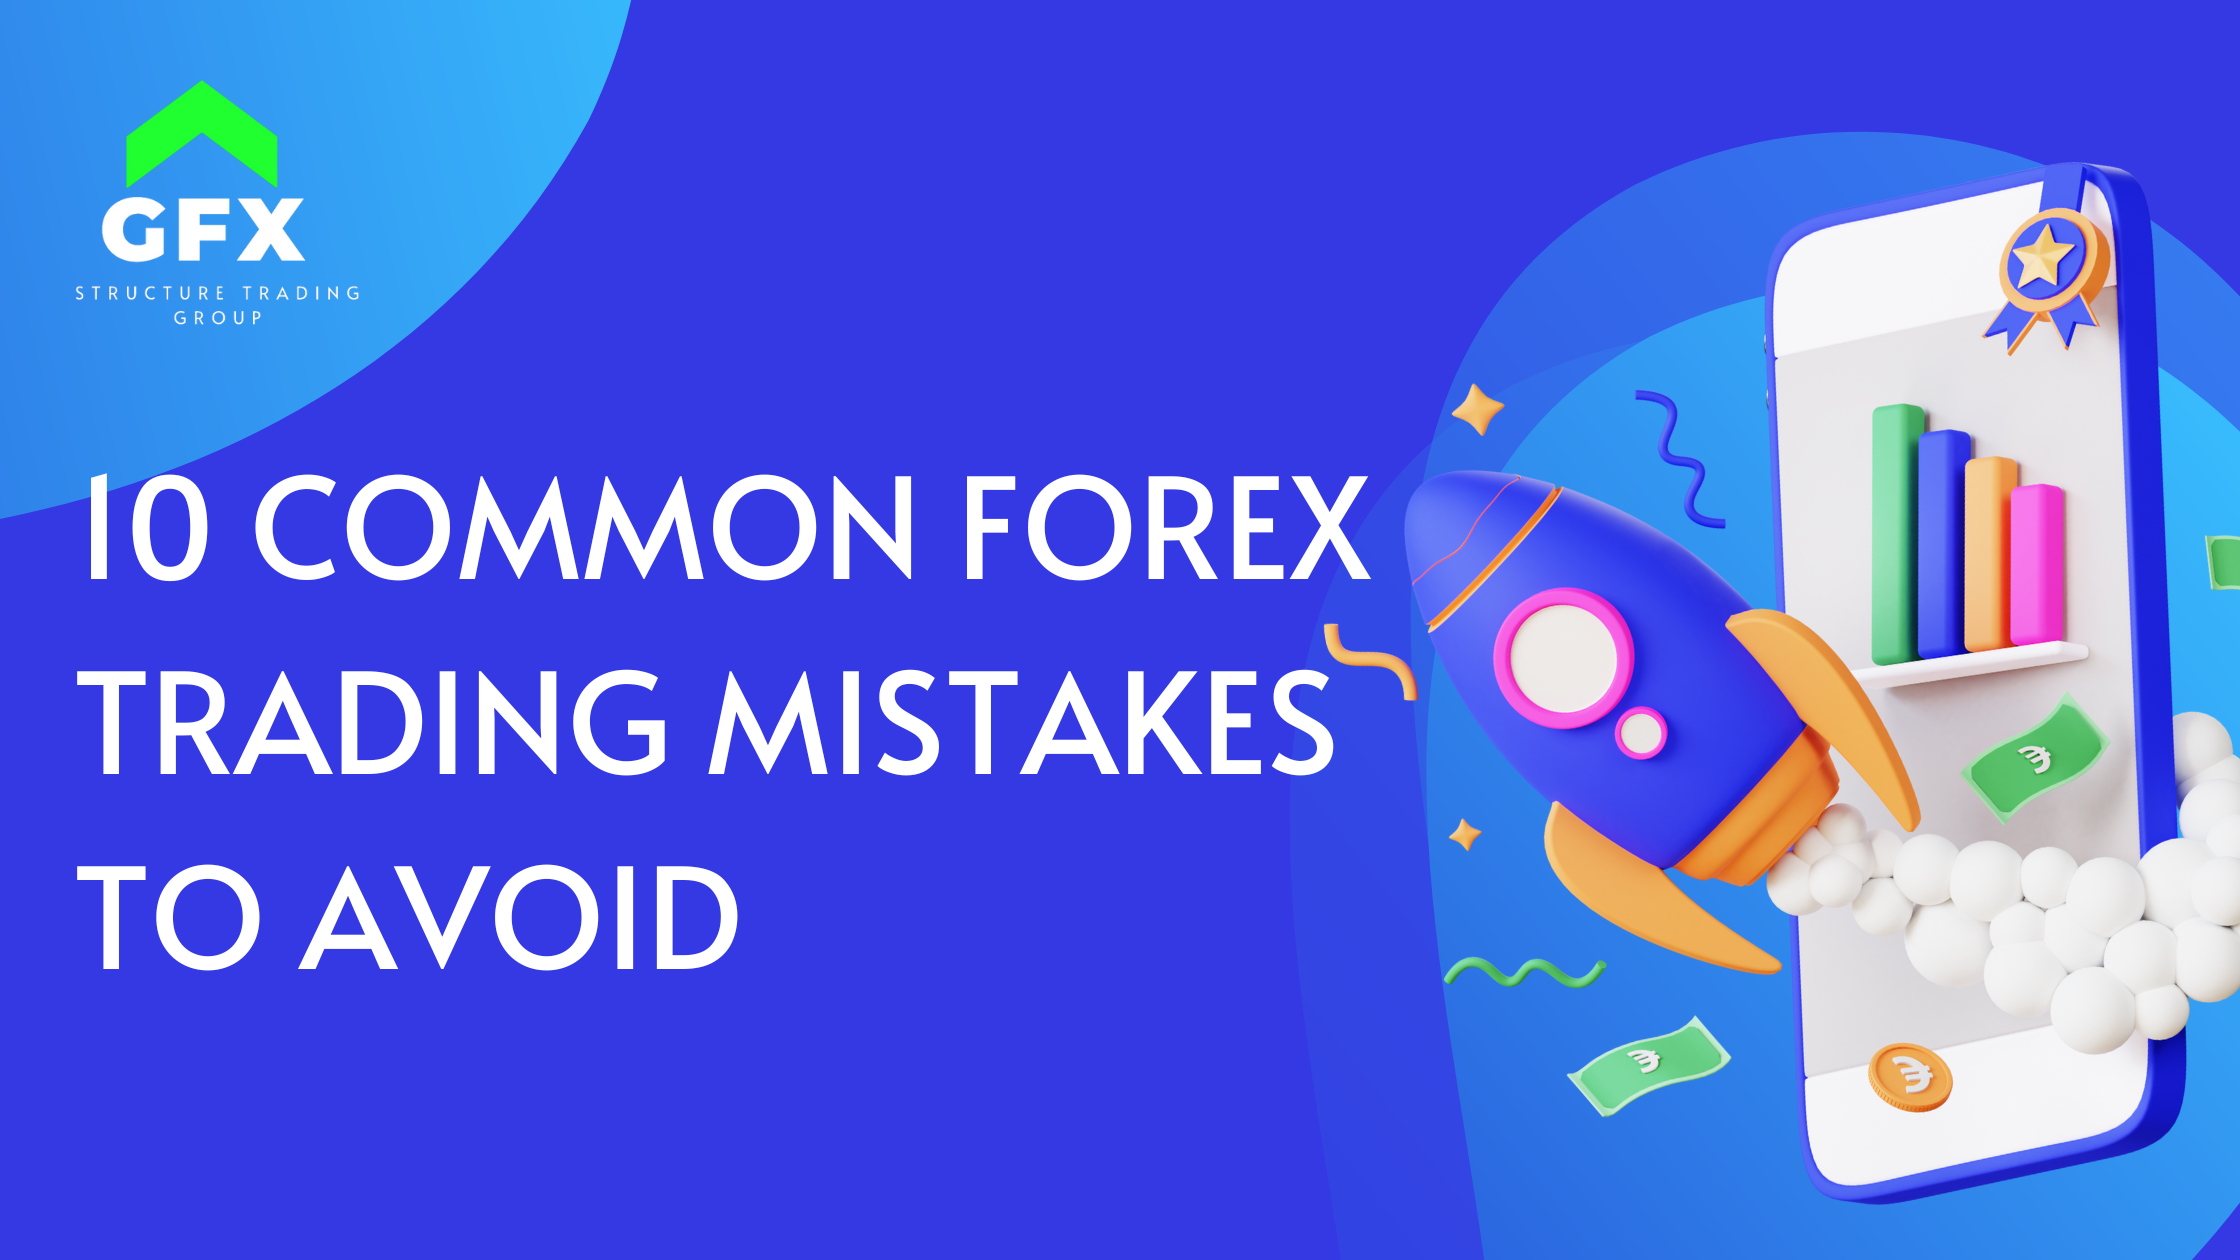 10 Common Forex Trading Mistakes to Avoid